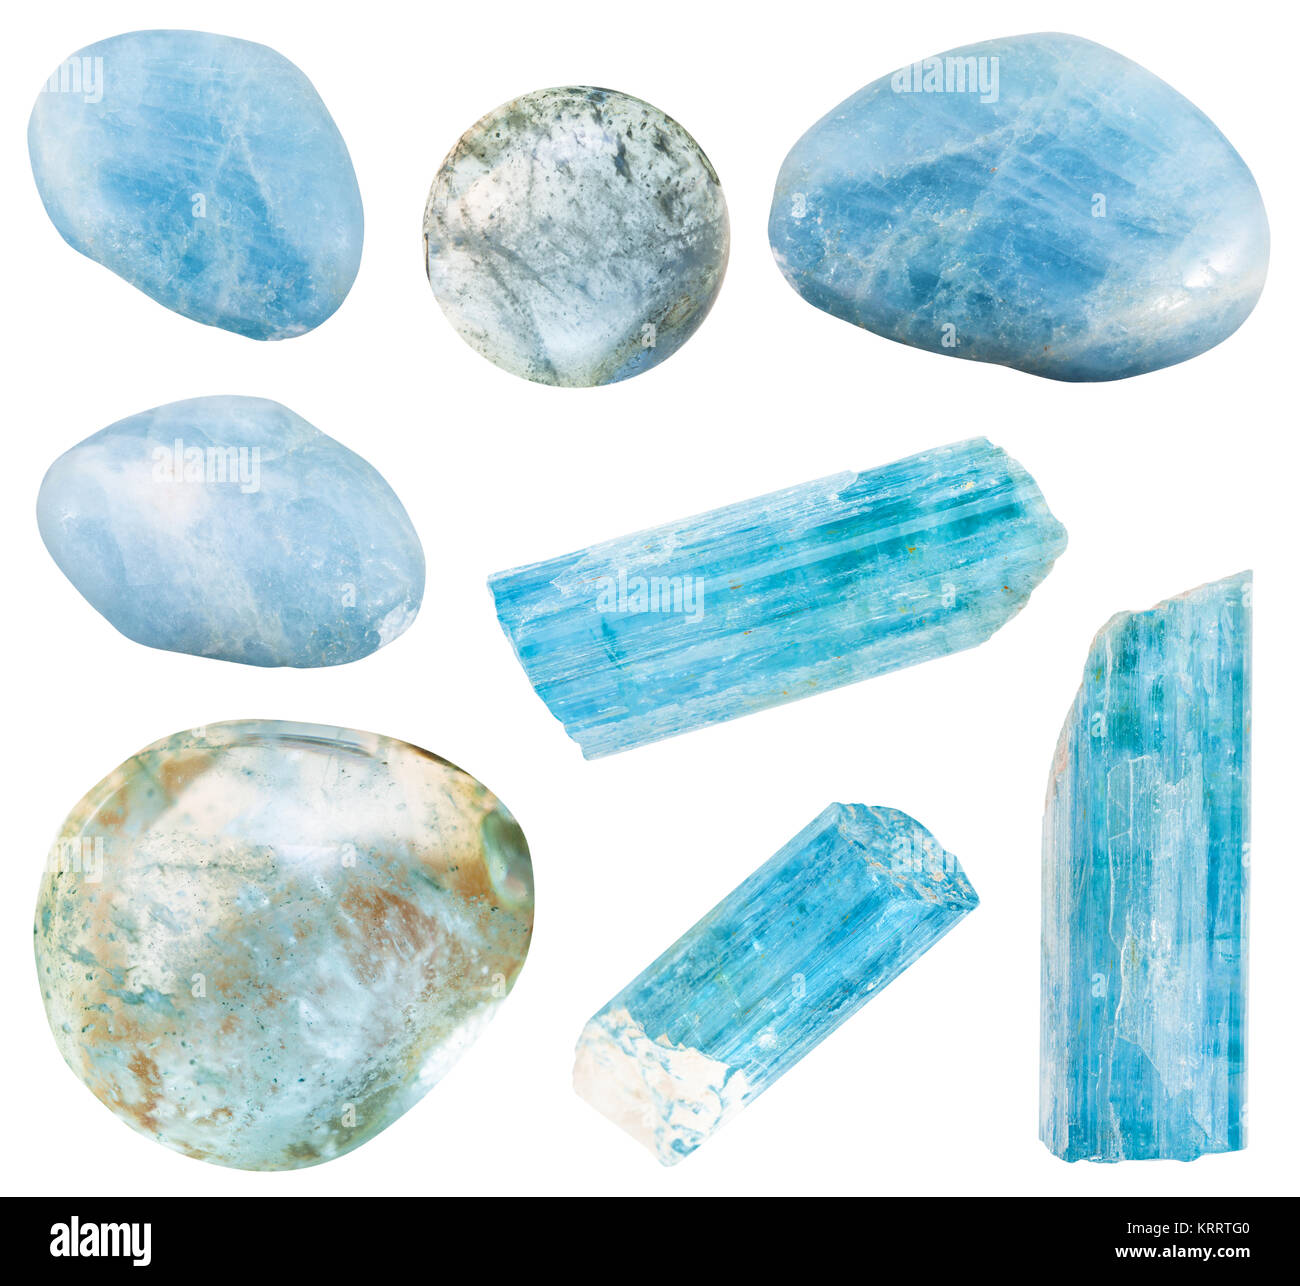 Set of blue mineral stones and gemstones Stock Photo by ©vvoennyy